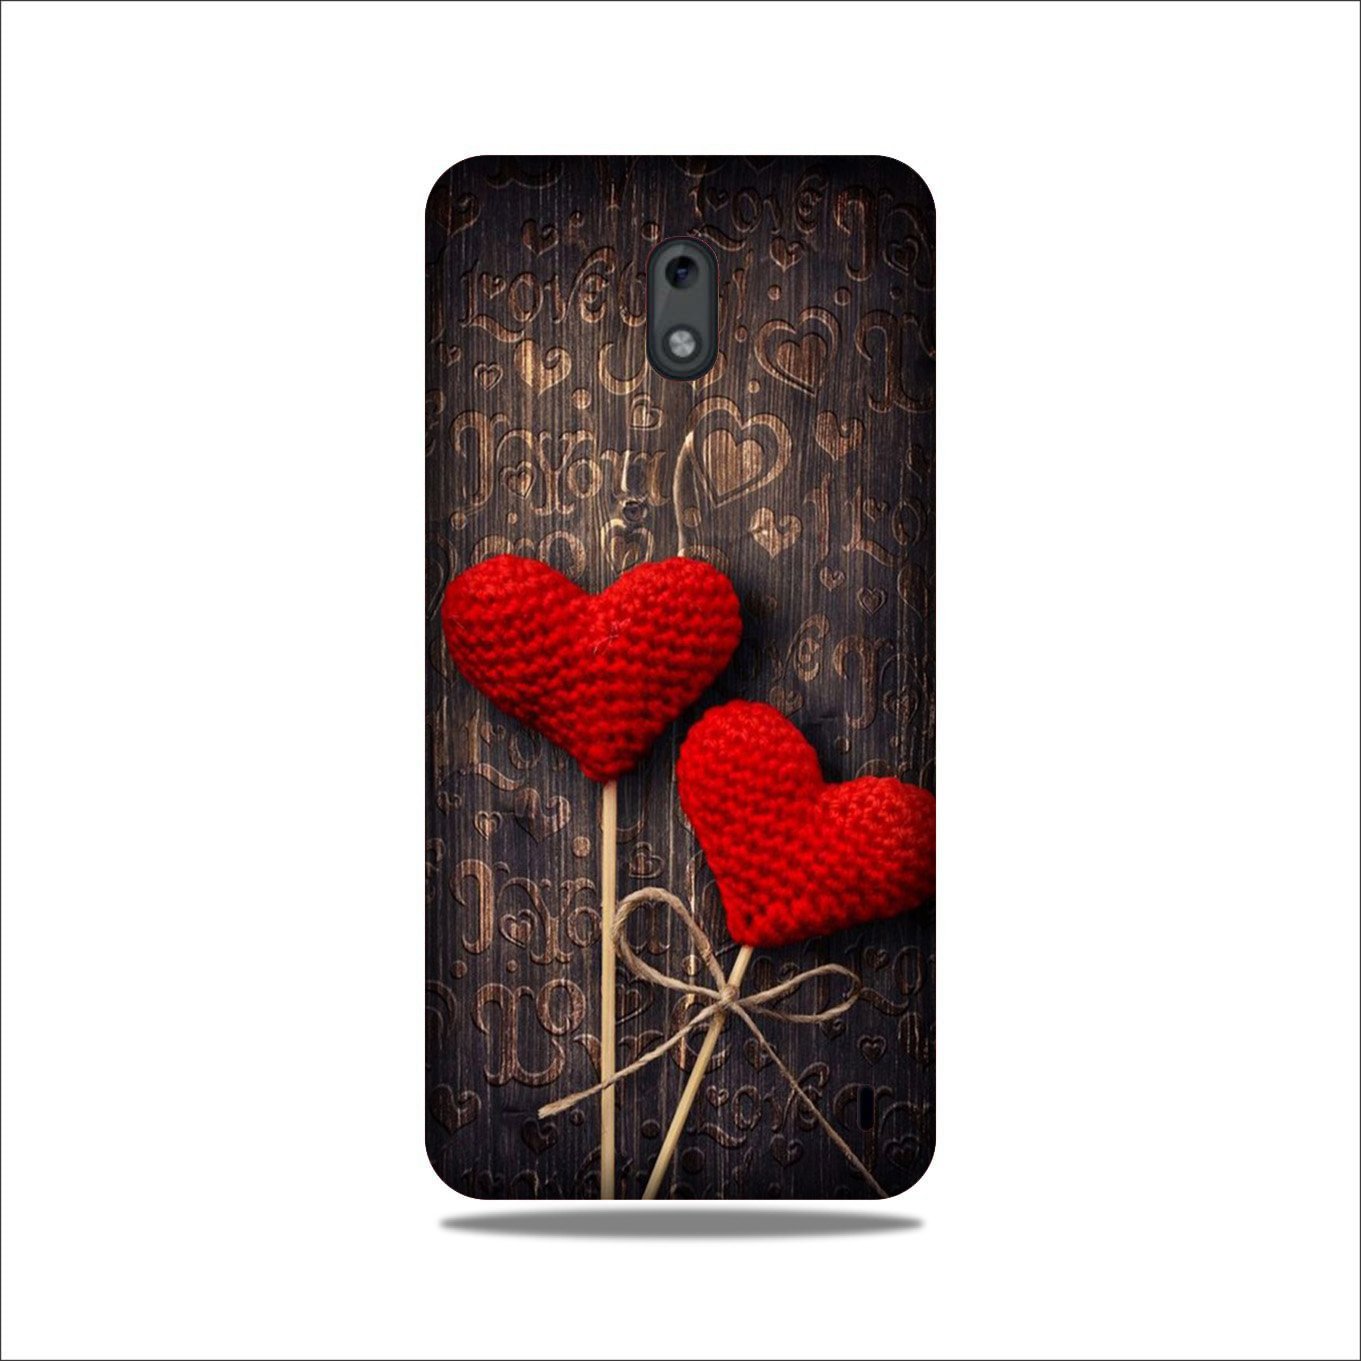 Red Hearts Case for Nokia 2